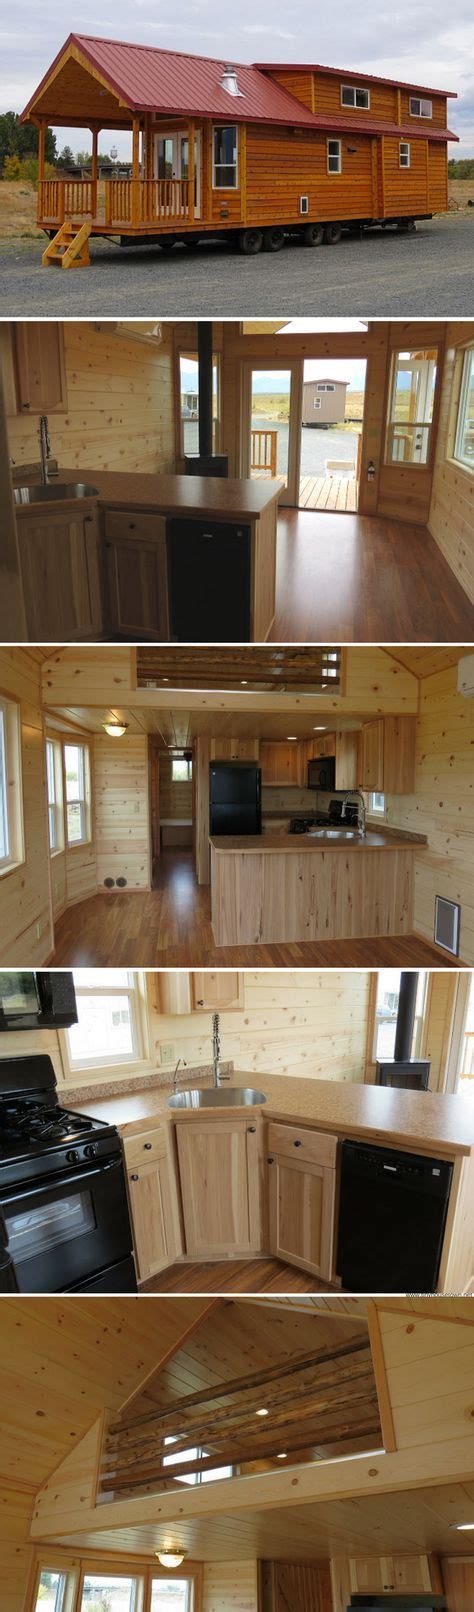 Although the rooms are small, they don't sacrifice on style. Classic Double Loft: a two bedroom park model cabin | Tiny ...